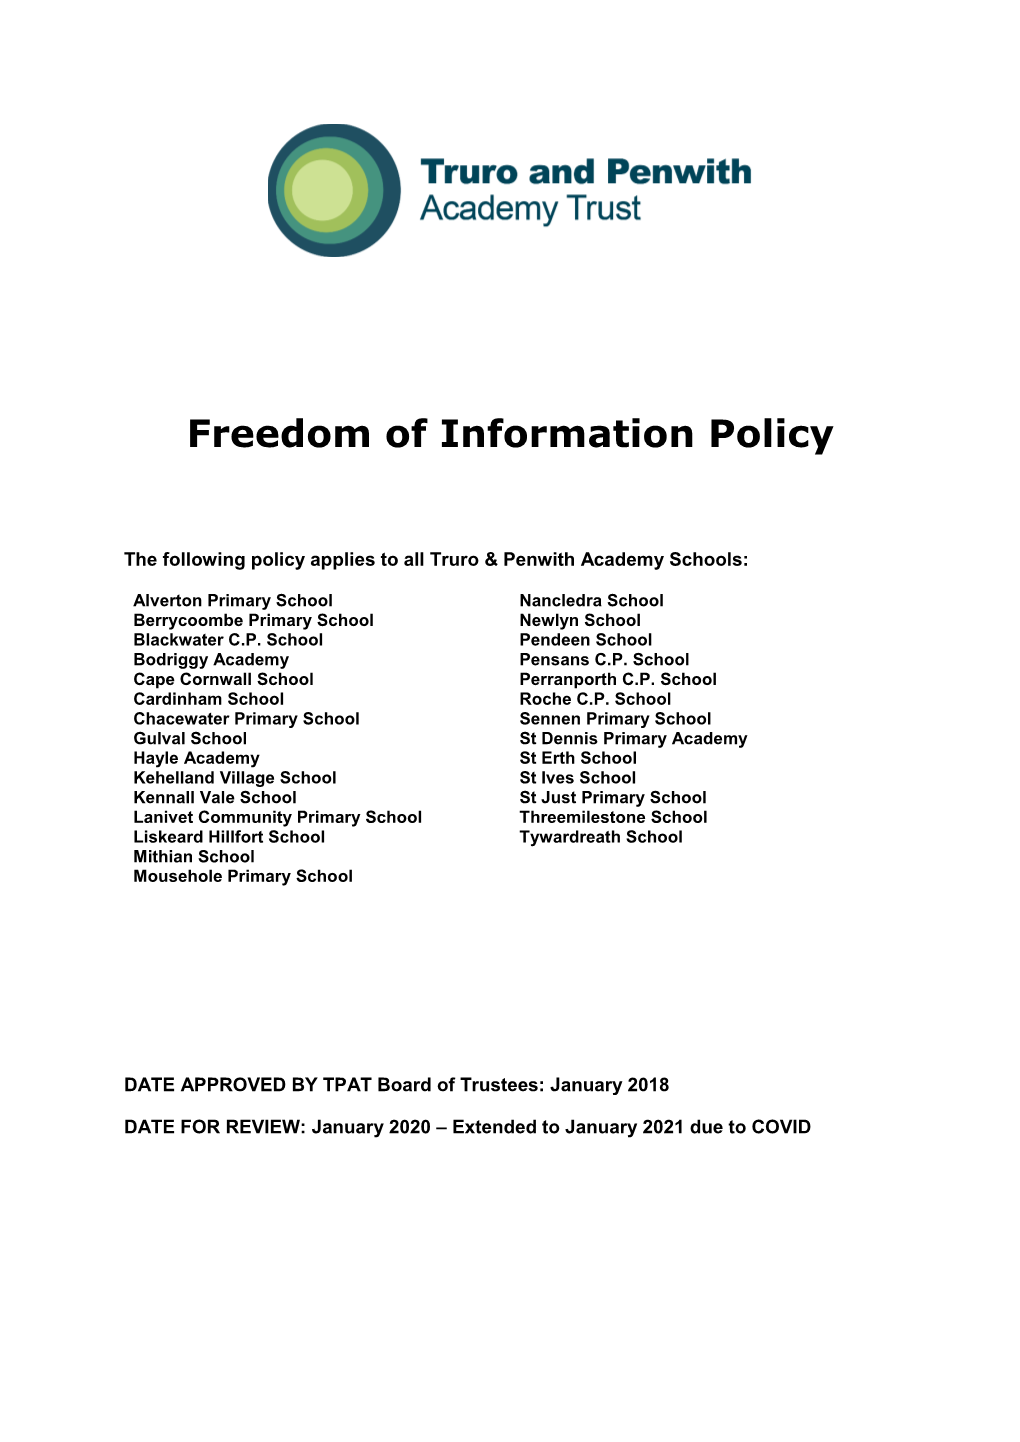 TPAT Freedom of Information Policy 2018-2021